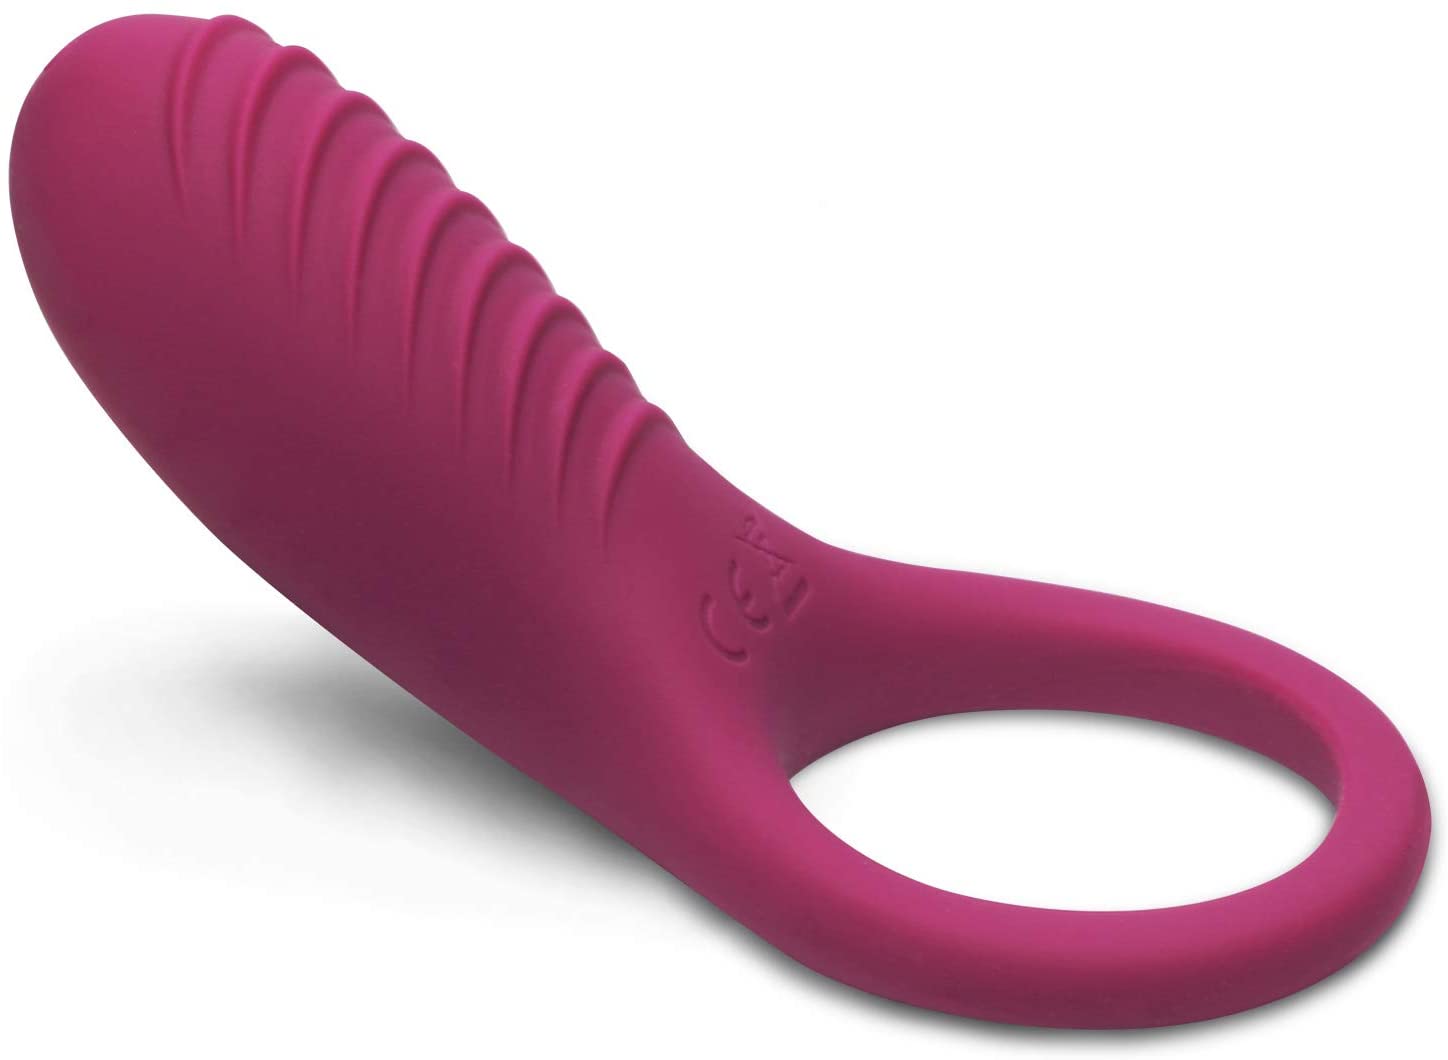 IMO Full Silicone Vibrating Rechargeable Penis Cock Ring - Wine Red